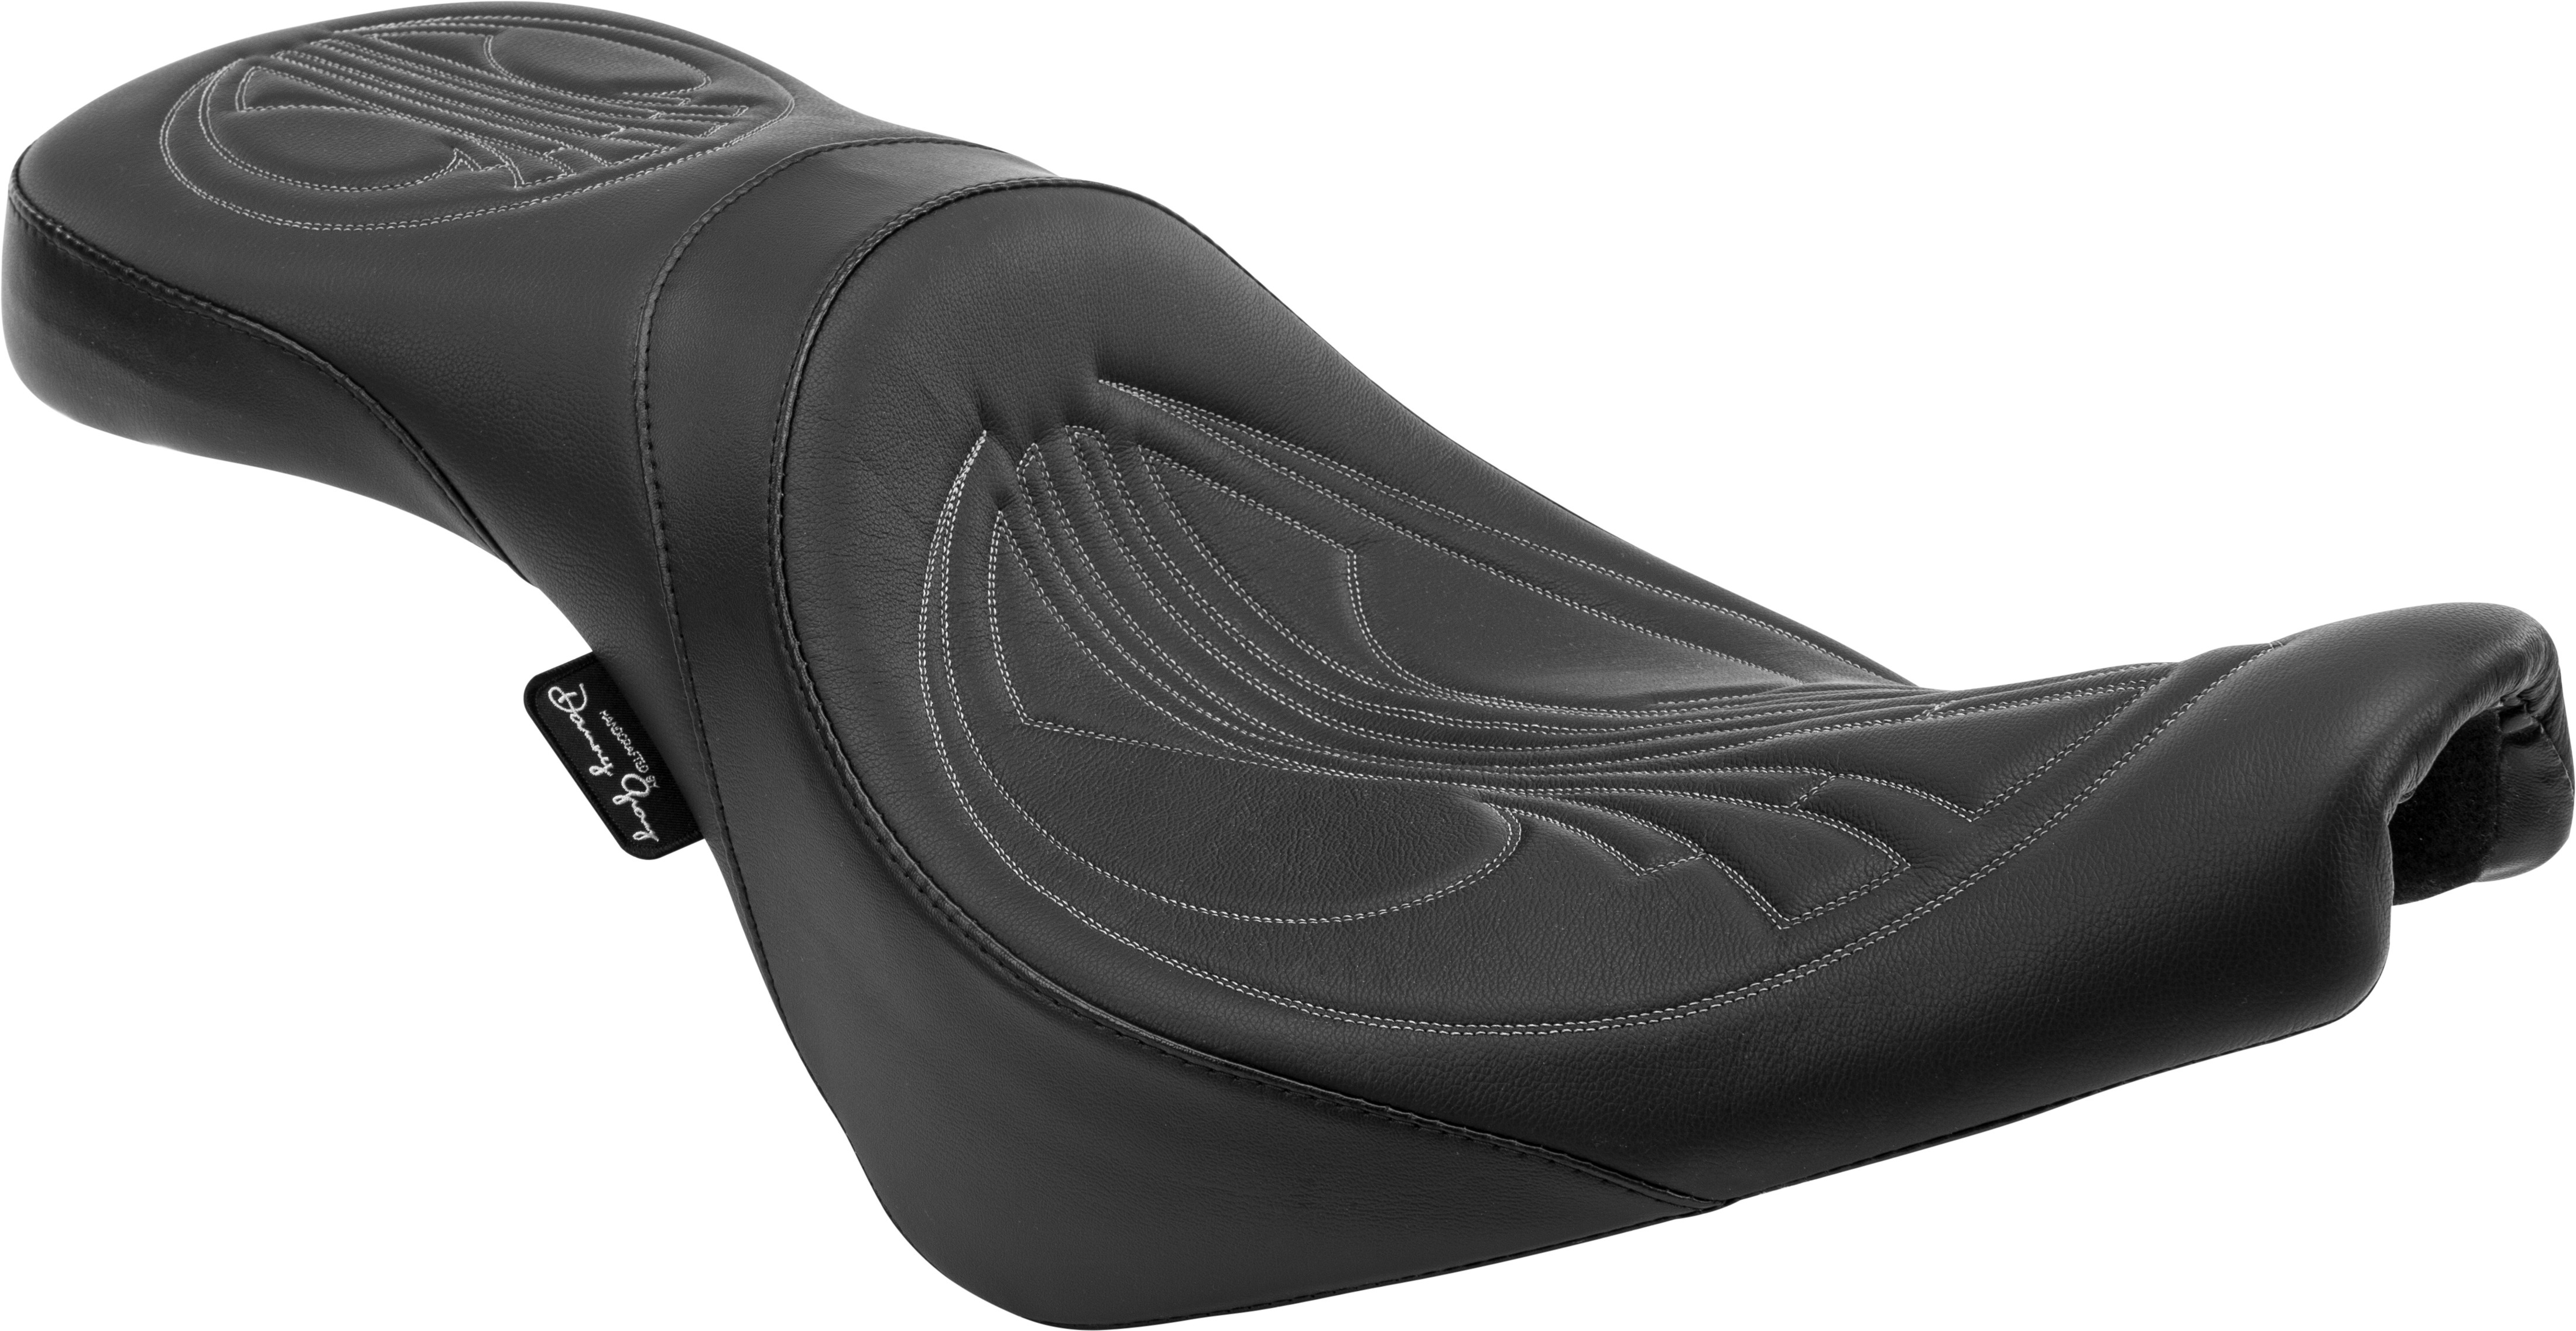 Weekday 2-Up XL Seat Back 2" - For 06-17 HD FLSTF/B FXST Softail - Click Image to Close